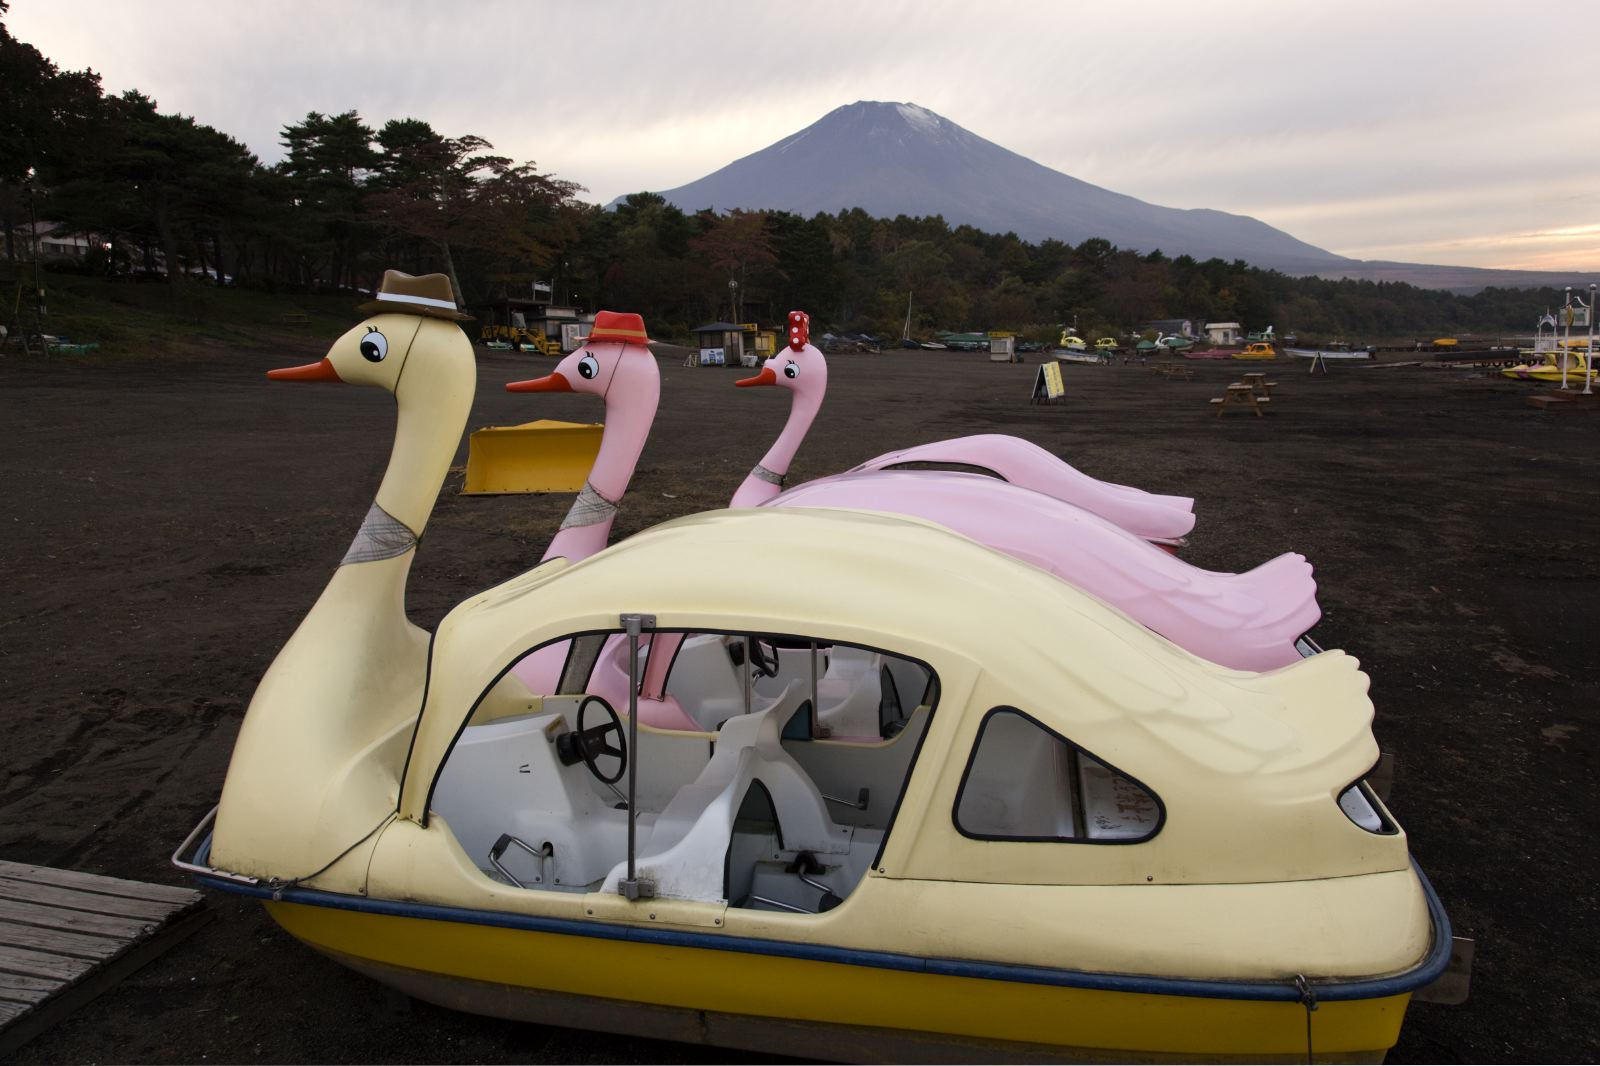 JAPAN. LAKE YAMANAKAKO. October 2009. Swan pleasure boats with view of Mount Fuji - 16x12inches £600 - Edition of 6 + 2AP's - 20x24inches £1000 - Edition of 4 + 2AP's